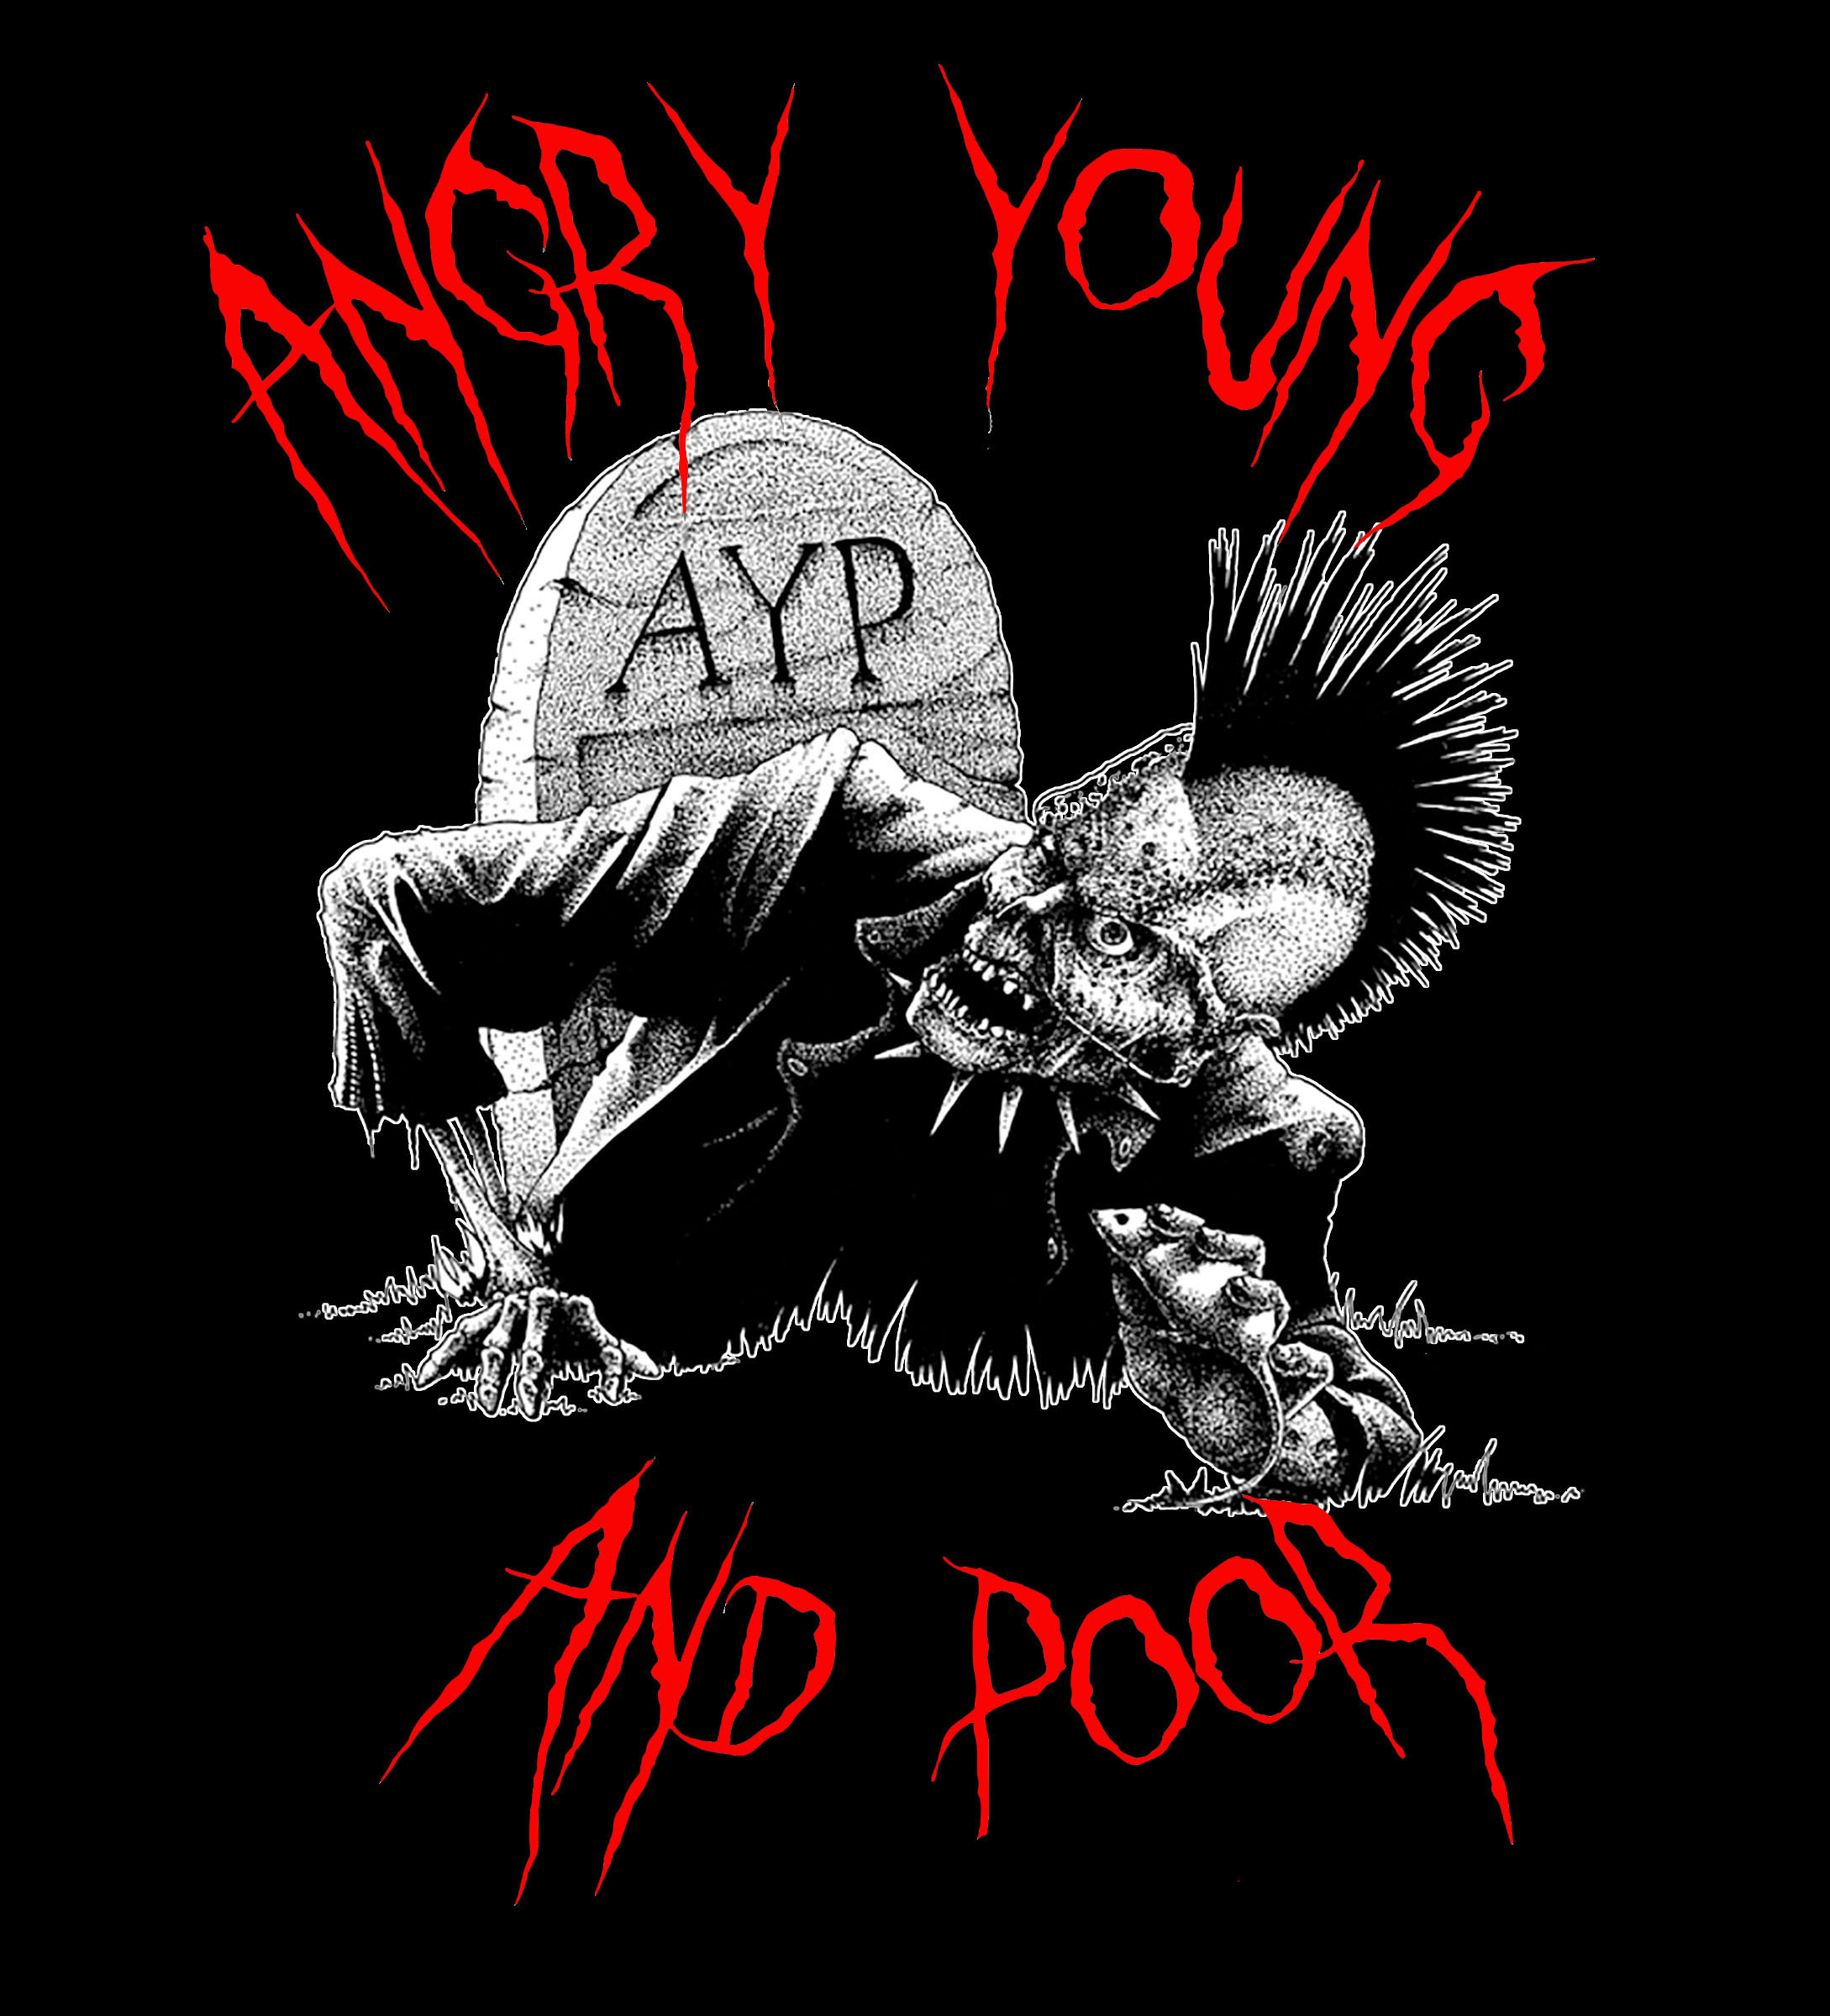 Angry Young And Poor- Zombie on a black ringspun cotton shirt